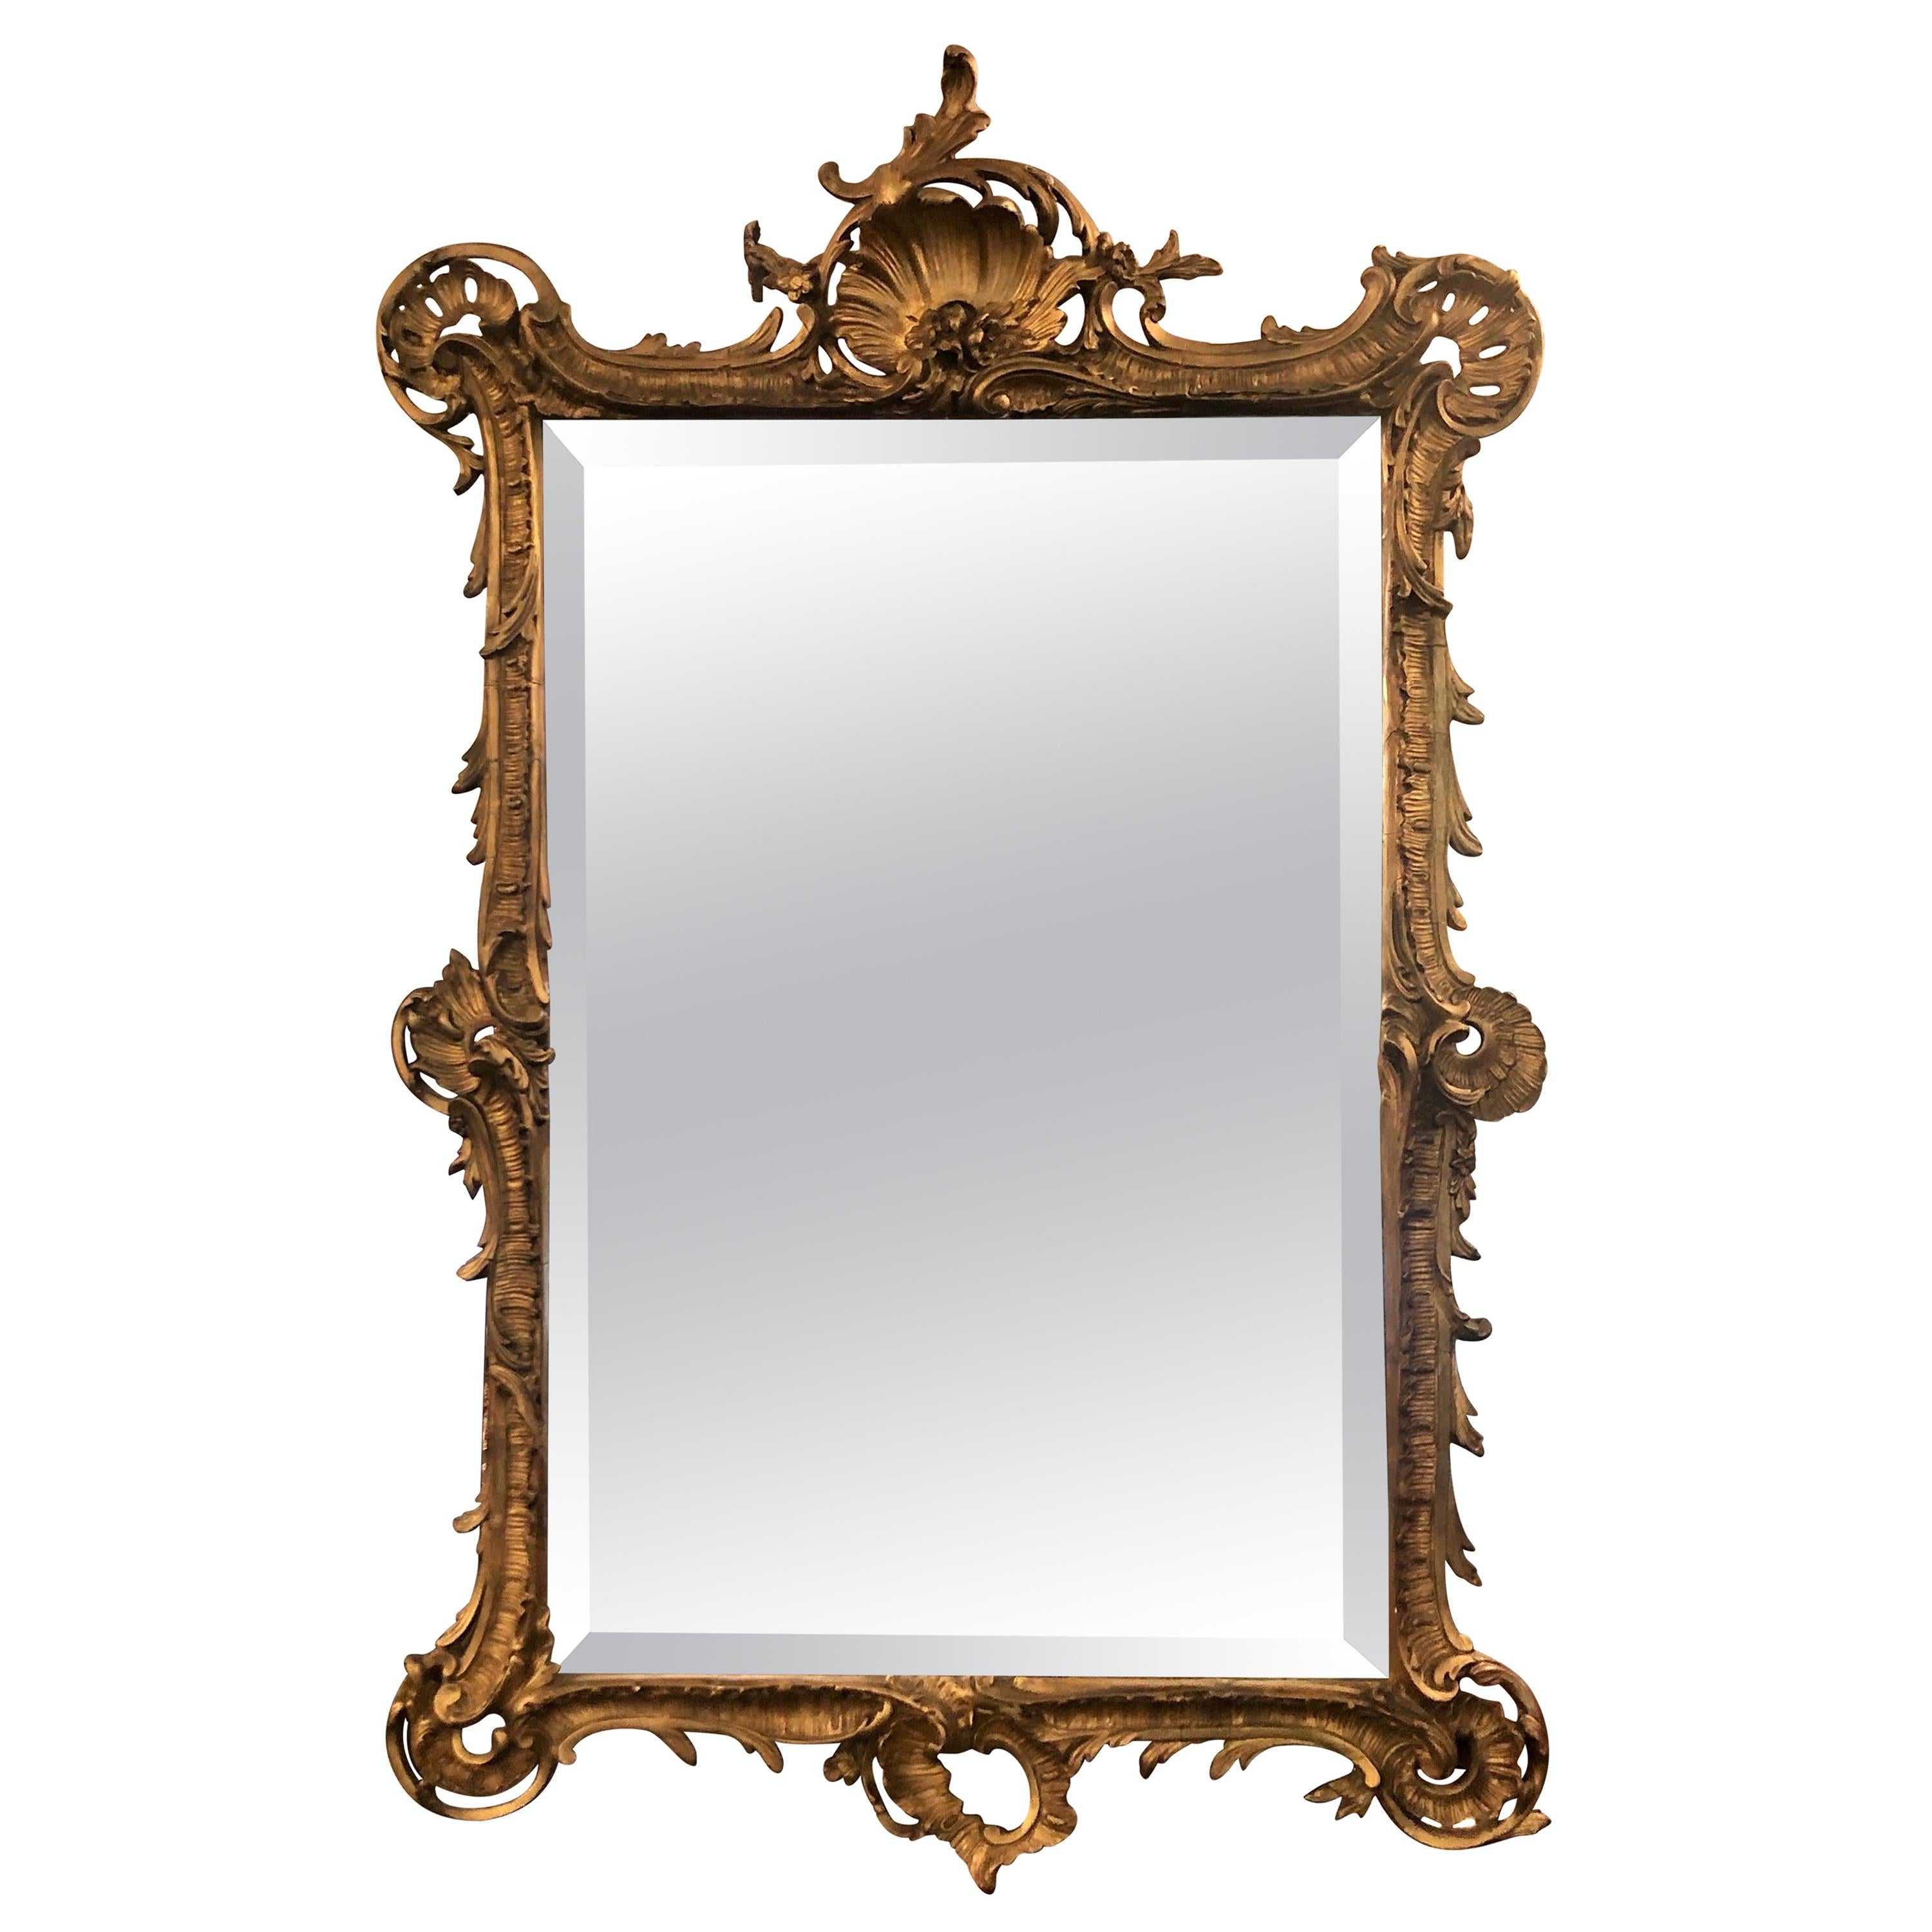 Antique French Rococo Style Carved Gilt Wood Beveled Mirror, Circa 1890-1900